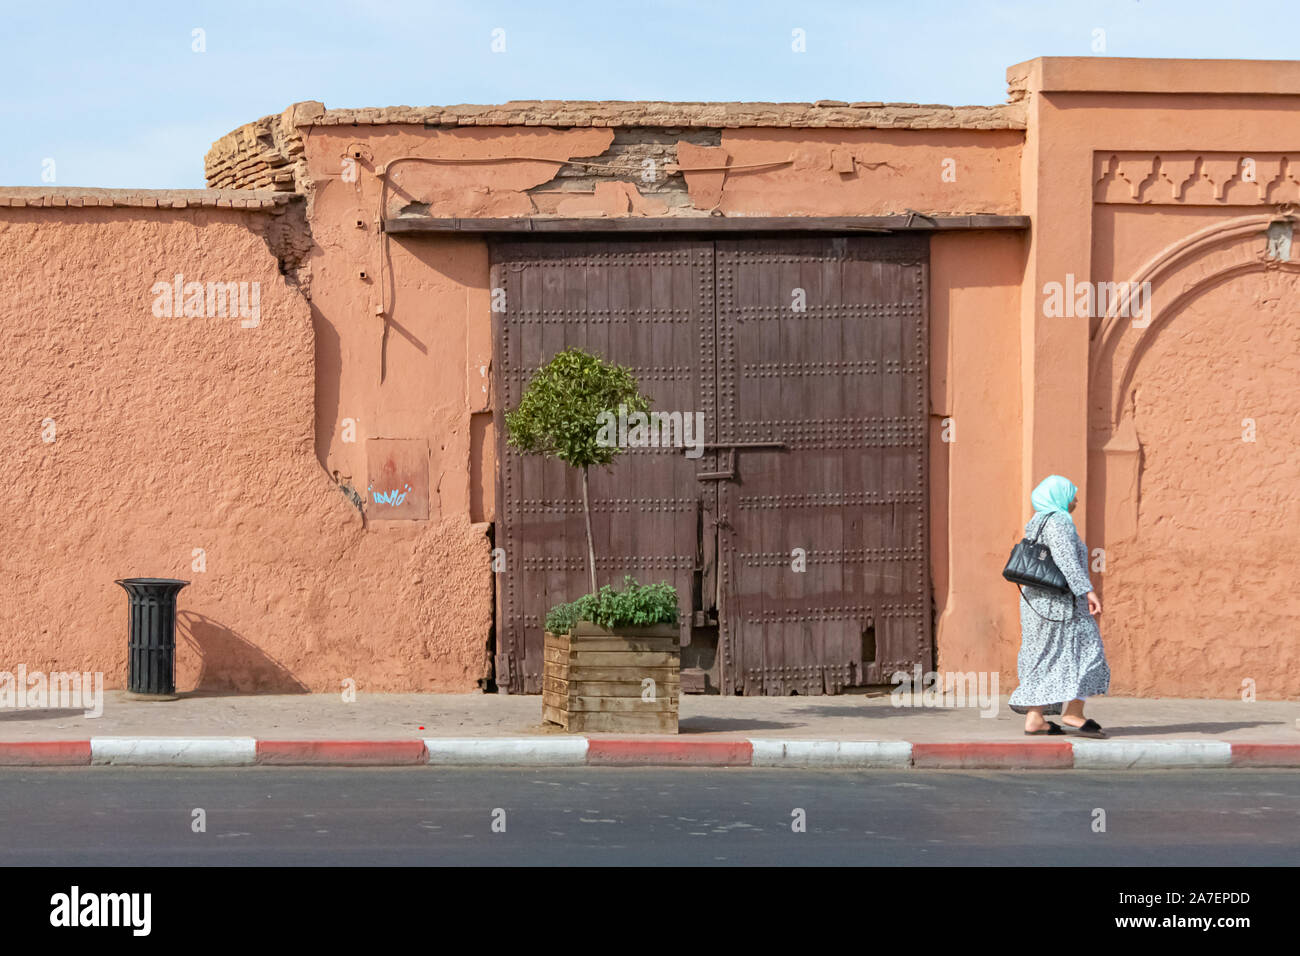 Arab woman and wooden door in the city of Marrakech. Morocco October 2019 Stock Photo